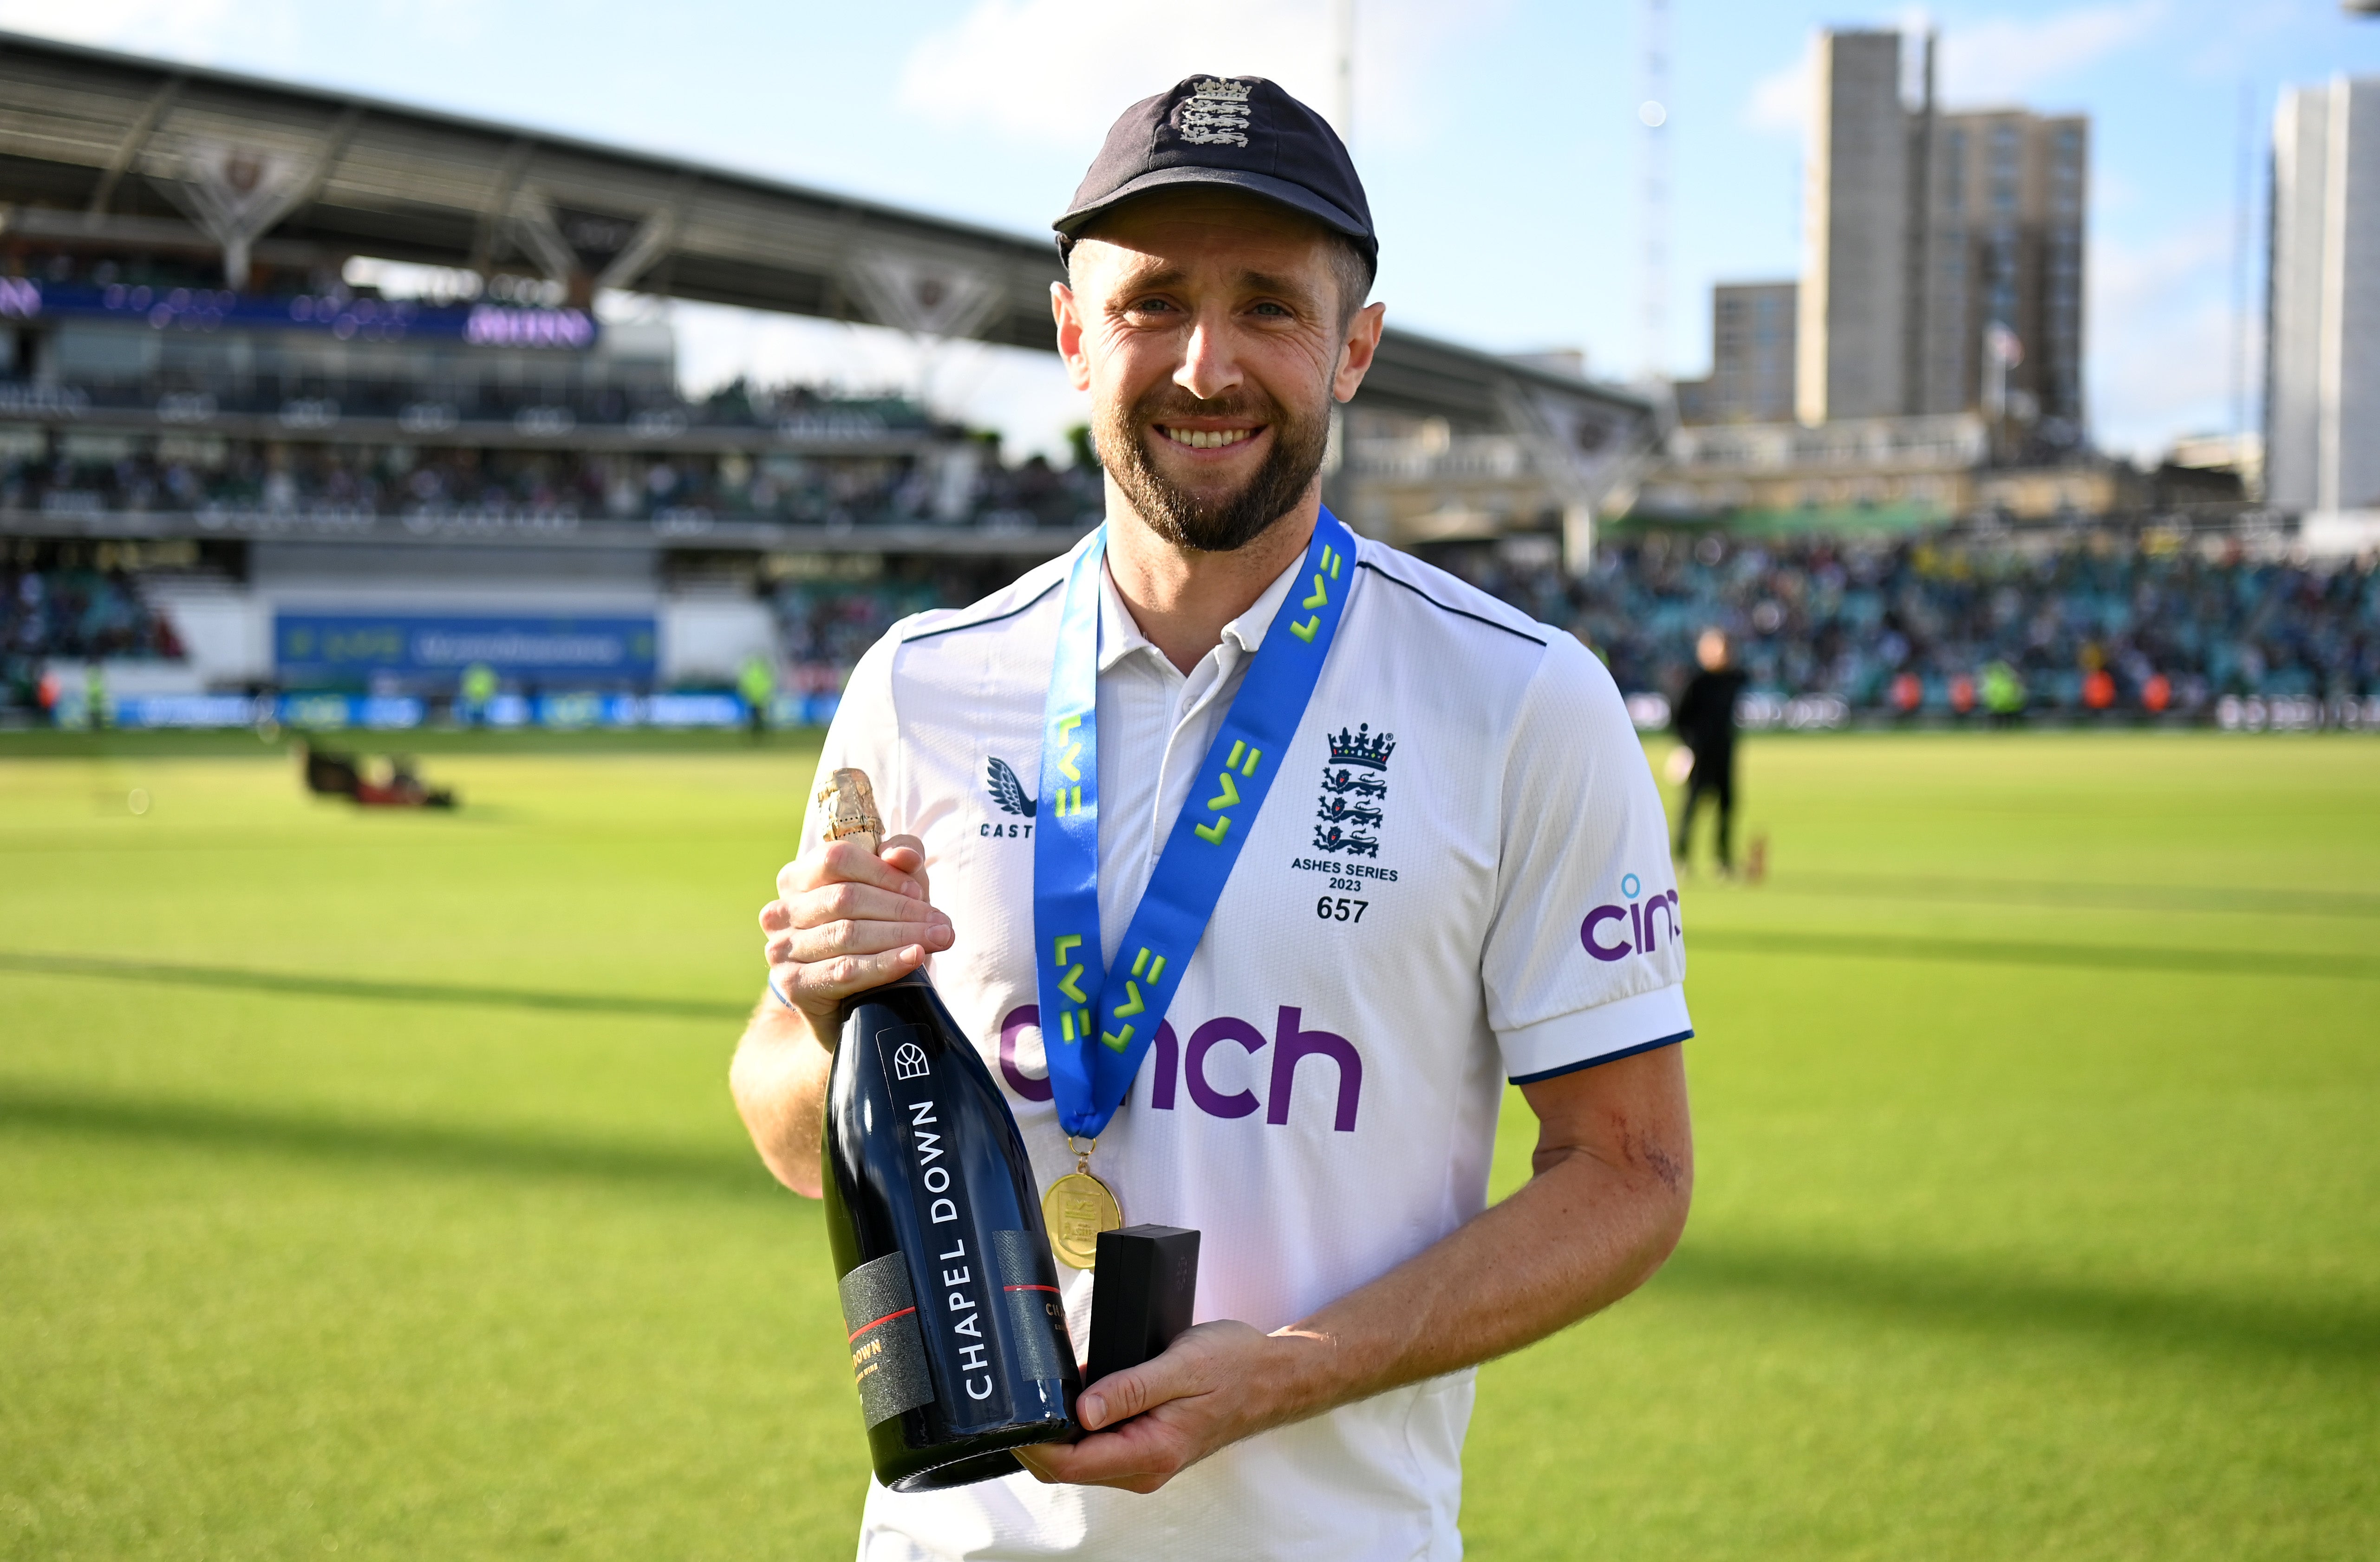 Woakes was named England player of the series after the conclusion of the Ashes